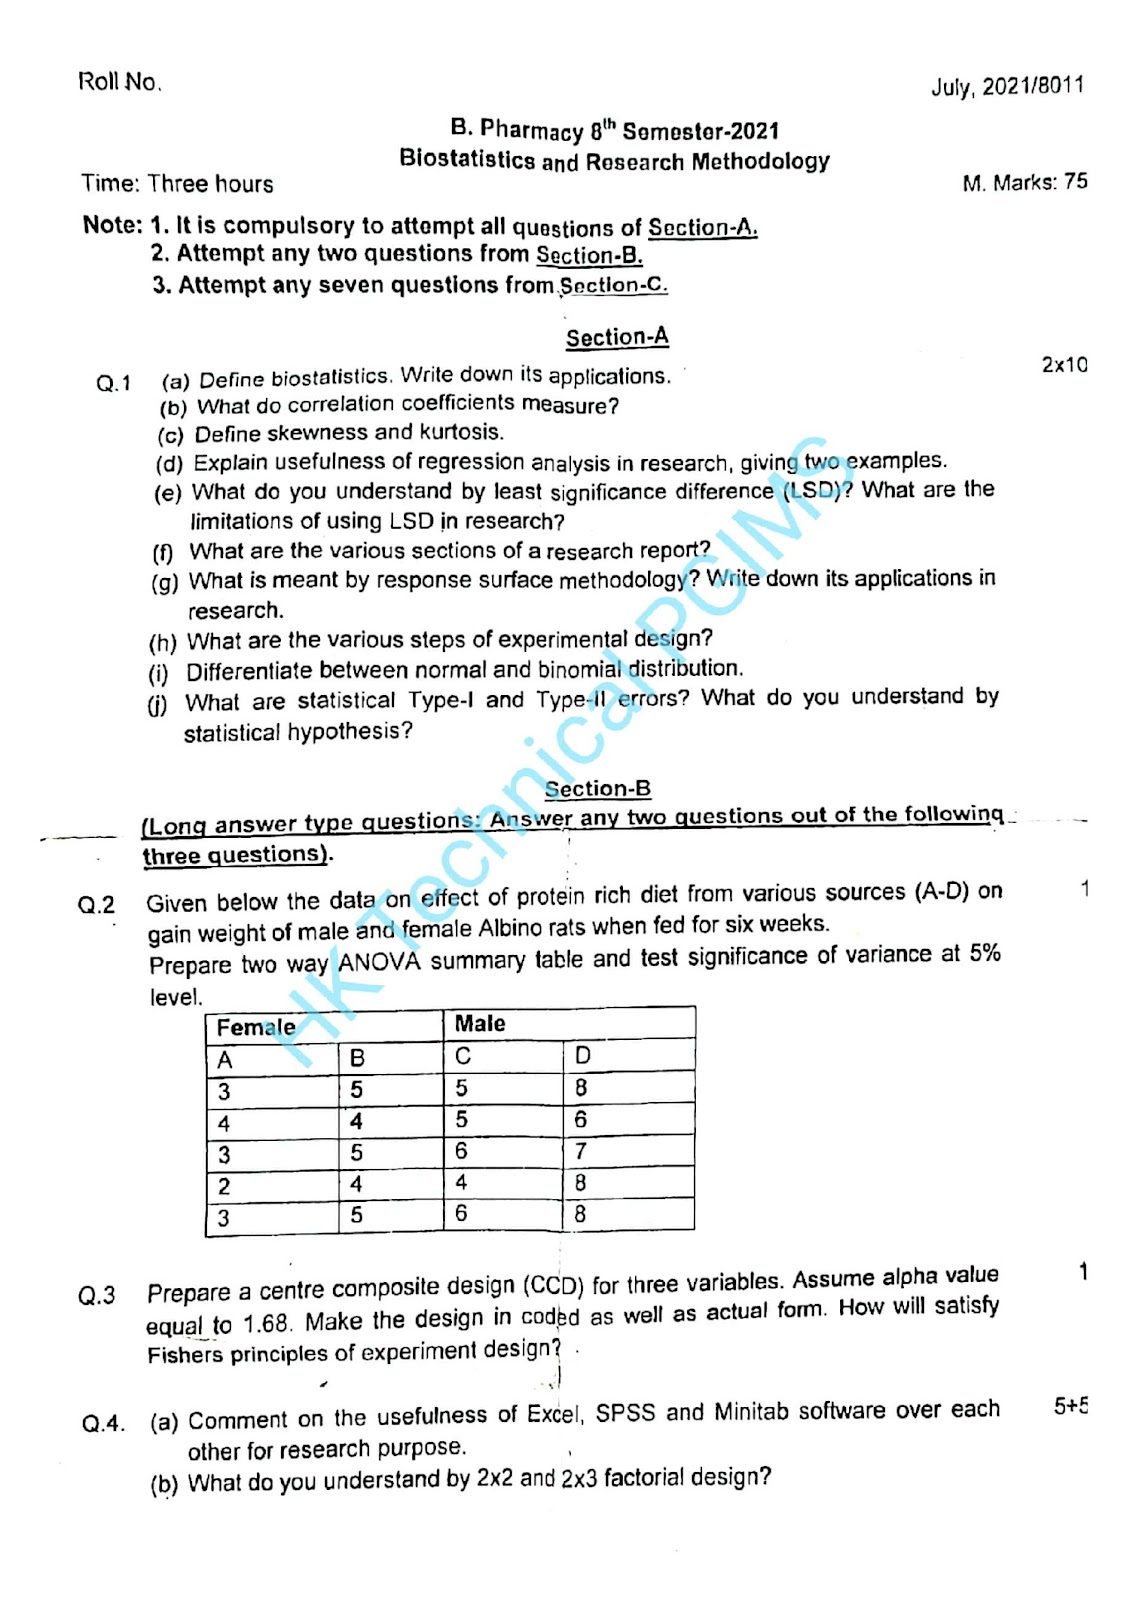 BP801T Biostatistics and Research Methodology 8th Semester B.Pharmacy Previous Year's Question Paper,BP801T Biostatistics and Research Methodology,BPharmacy,BPharm 8th Semester,Previous Year's Question Papers,